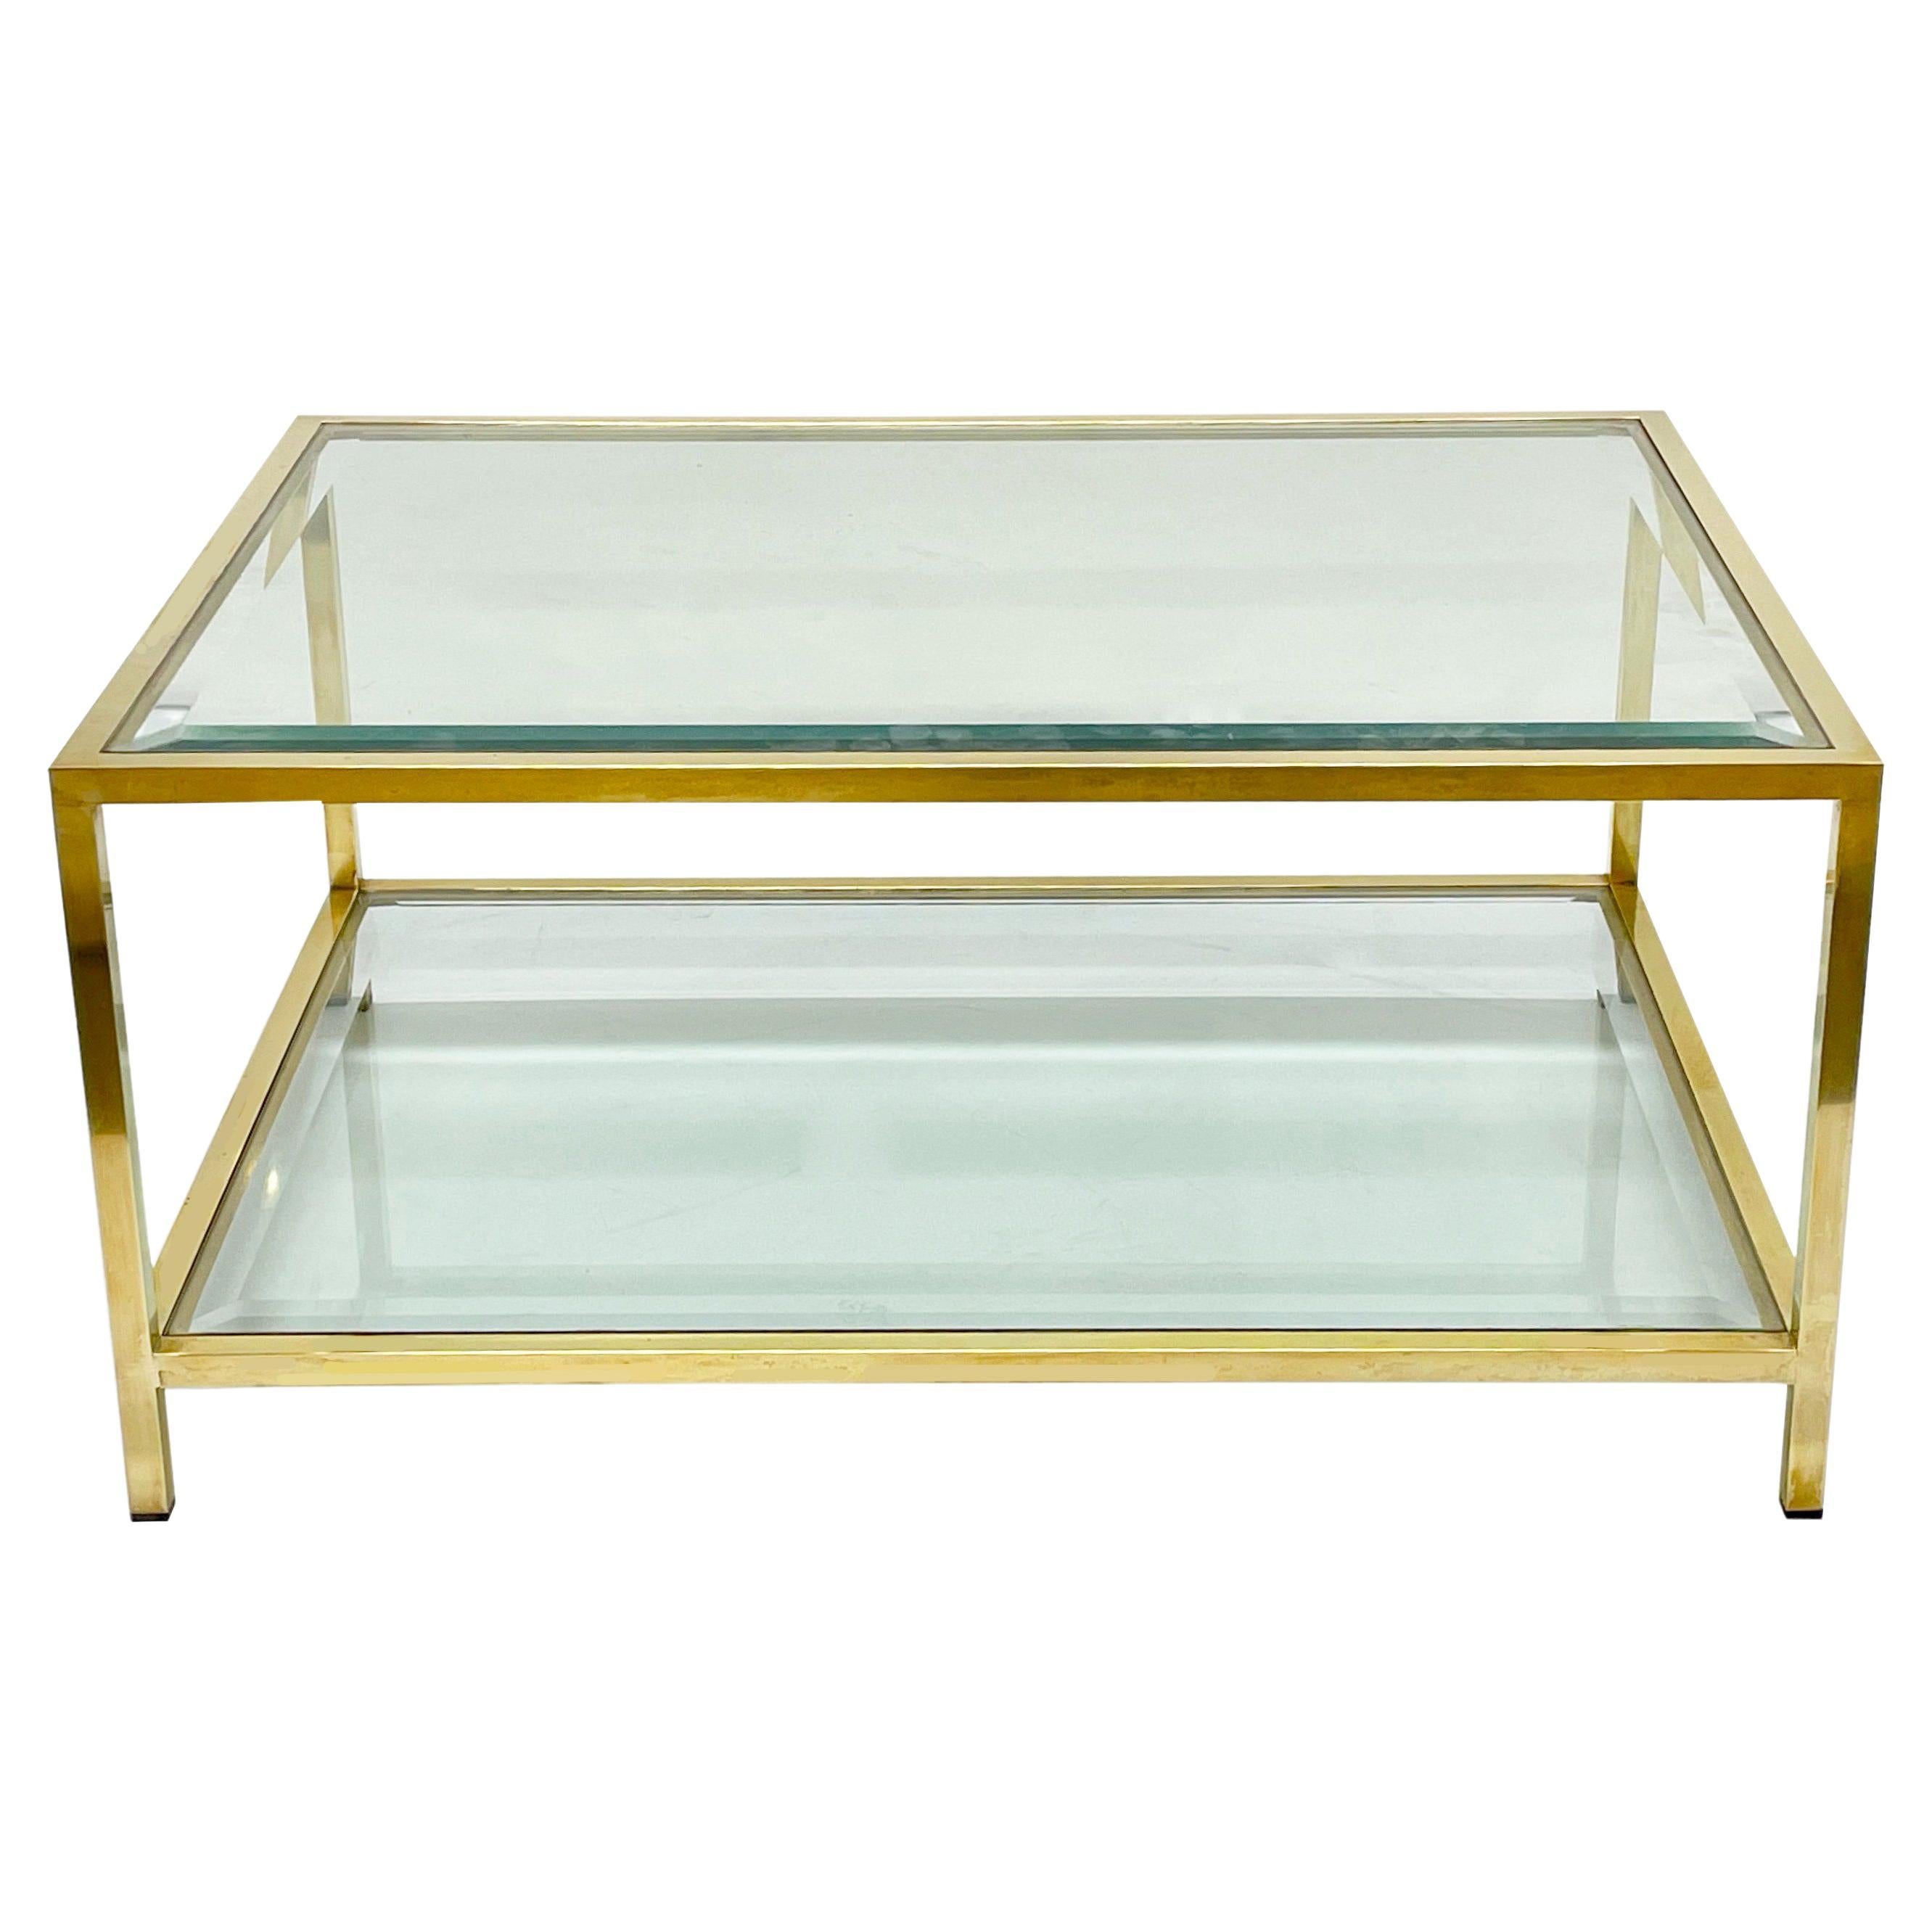 MidCentury Brass and Glass Italian Double-Tiered Rectangular Coffee Table, 1970s